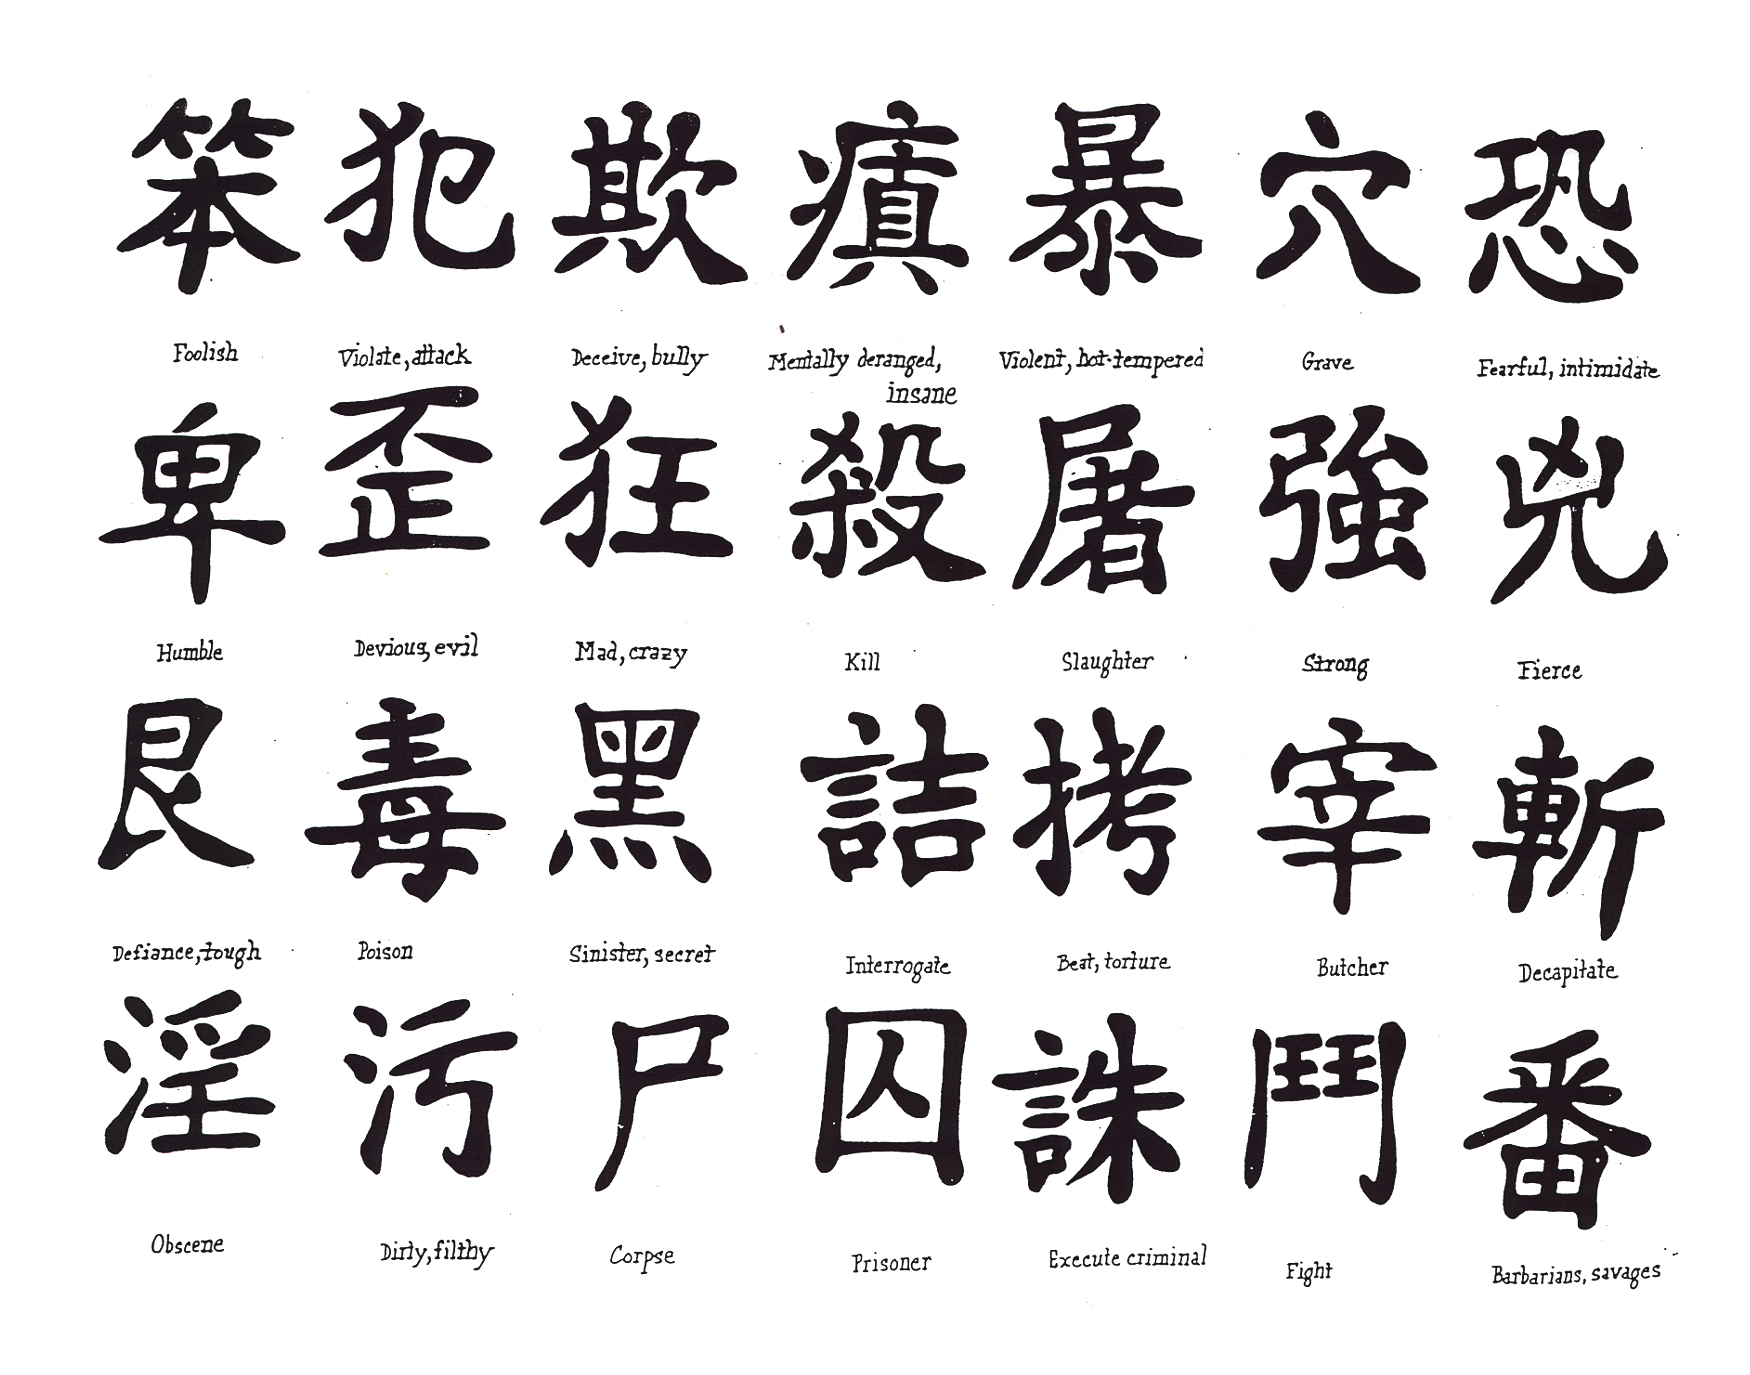 Chinese Symbols and Meanings Tattoos